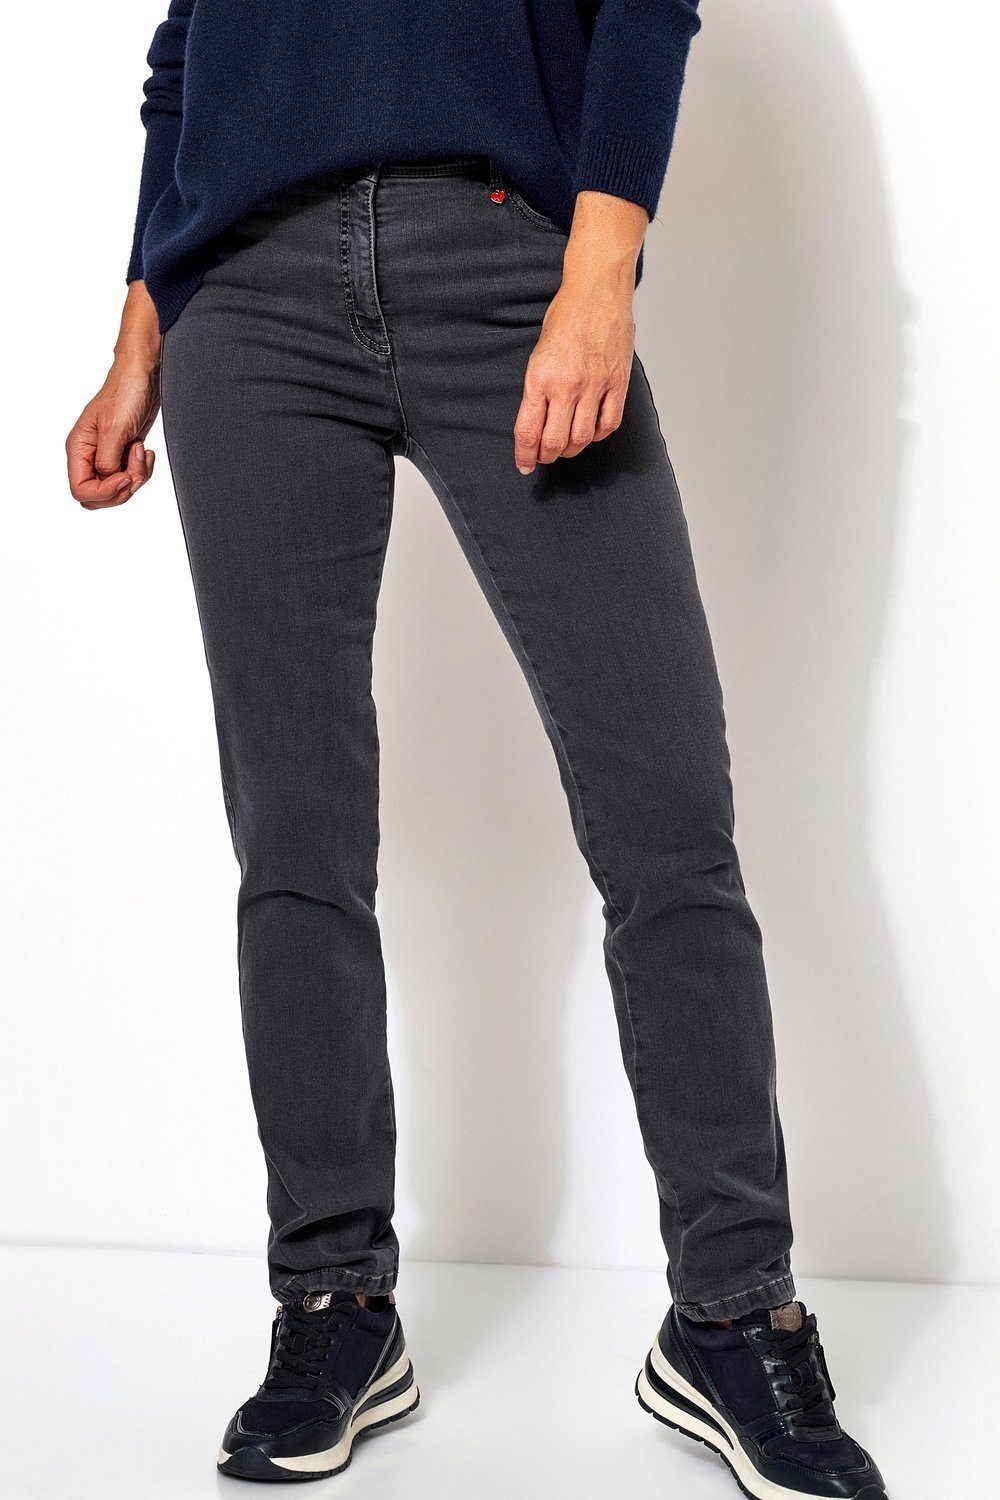 Relaxed by TONI 5-Pocket-Jeans My Love in legerer Passform grau - 086